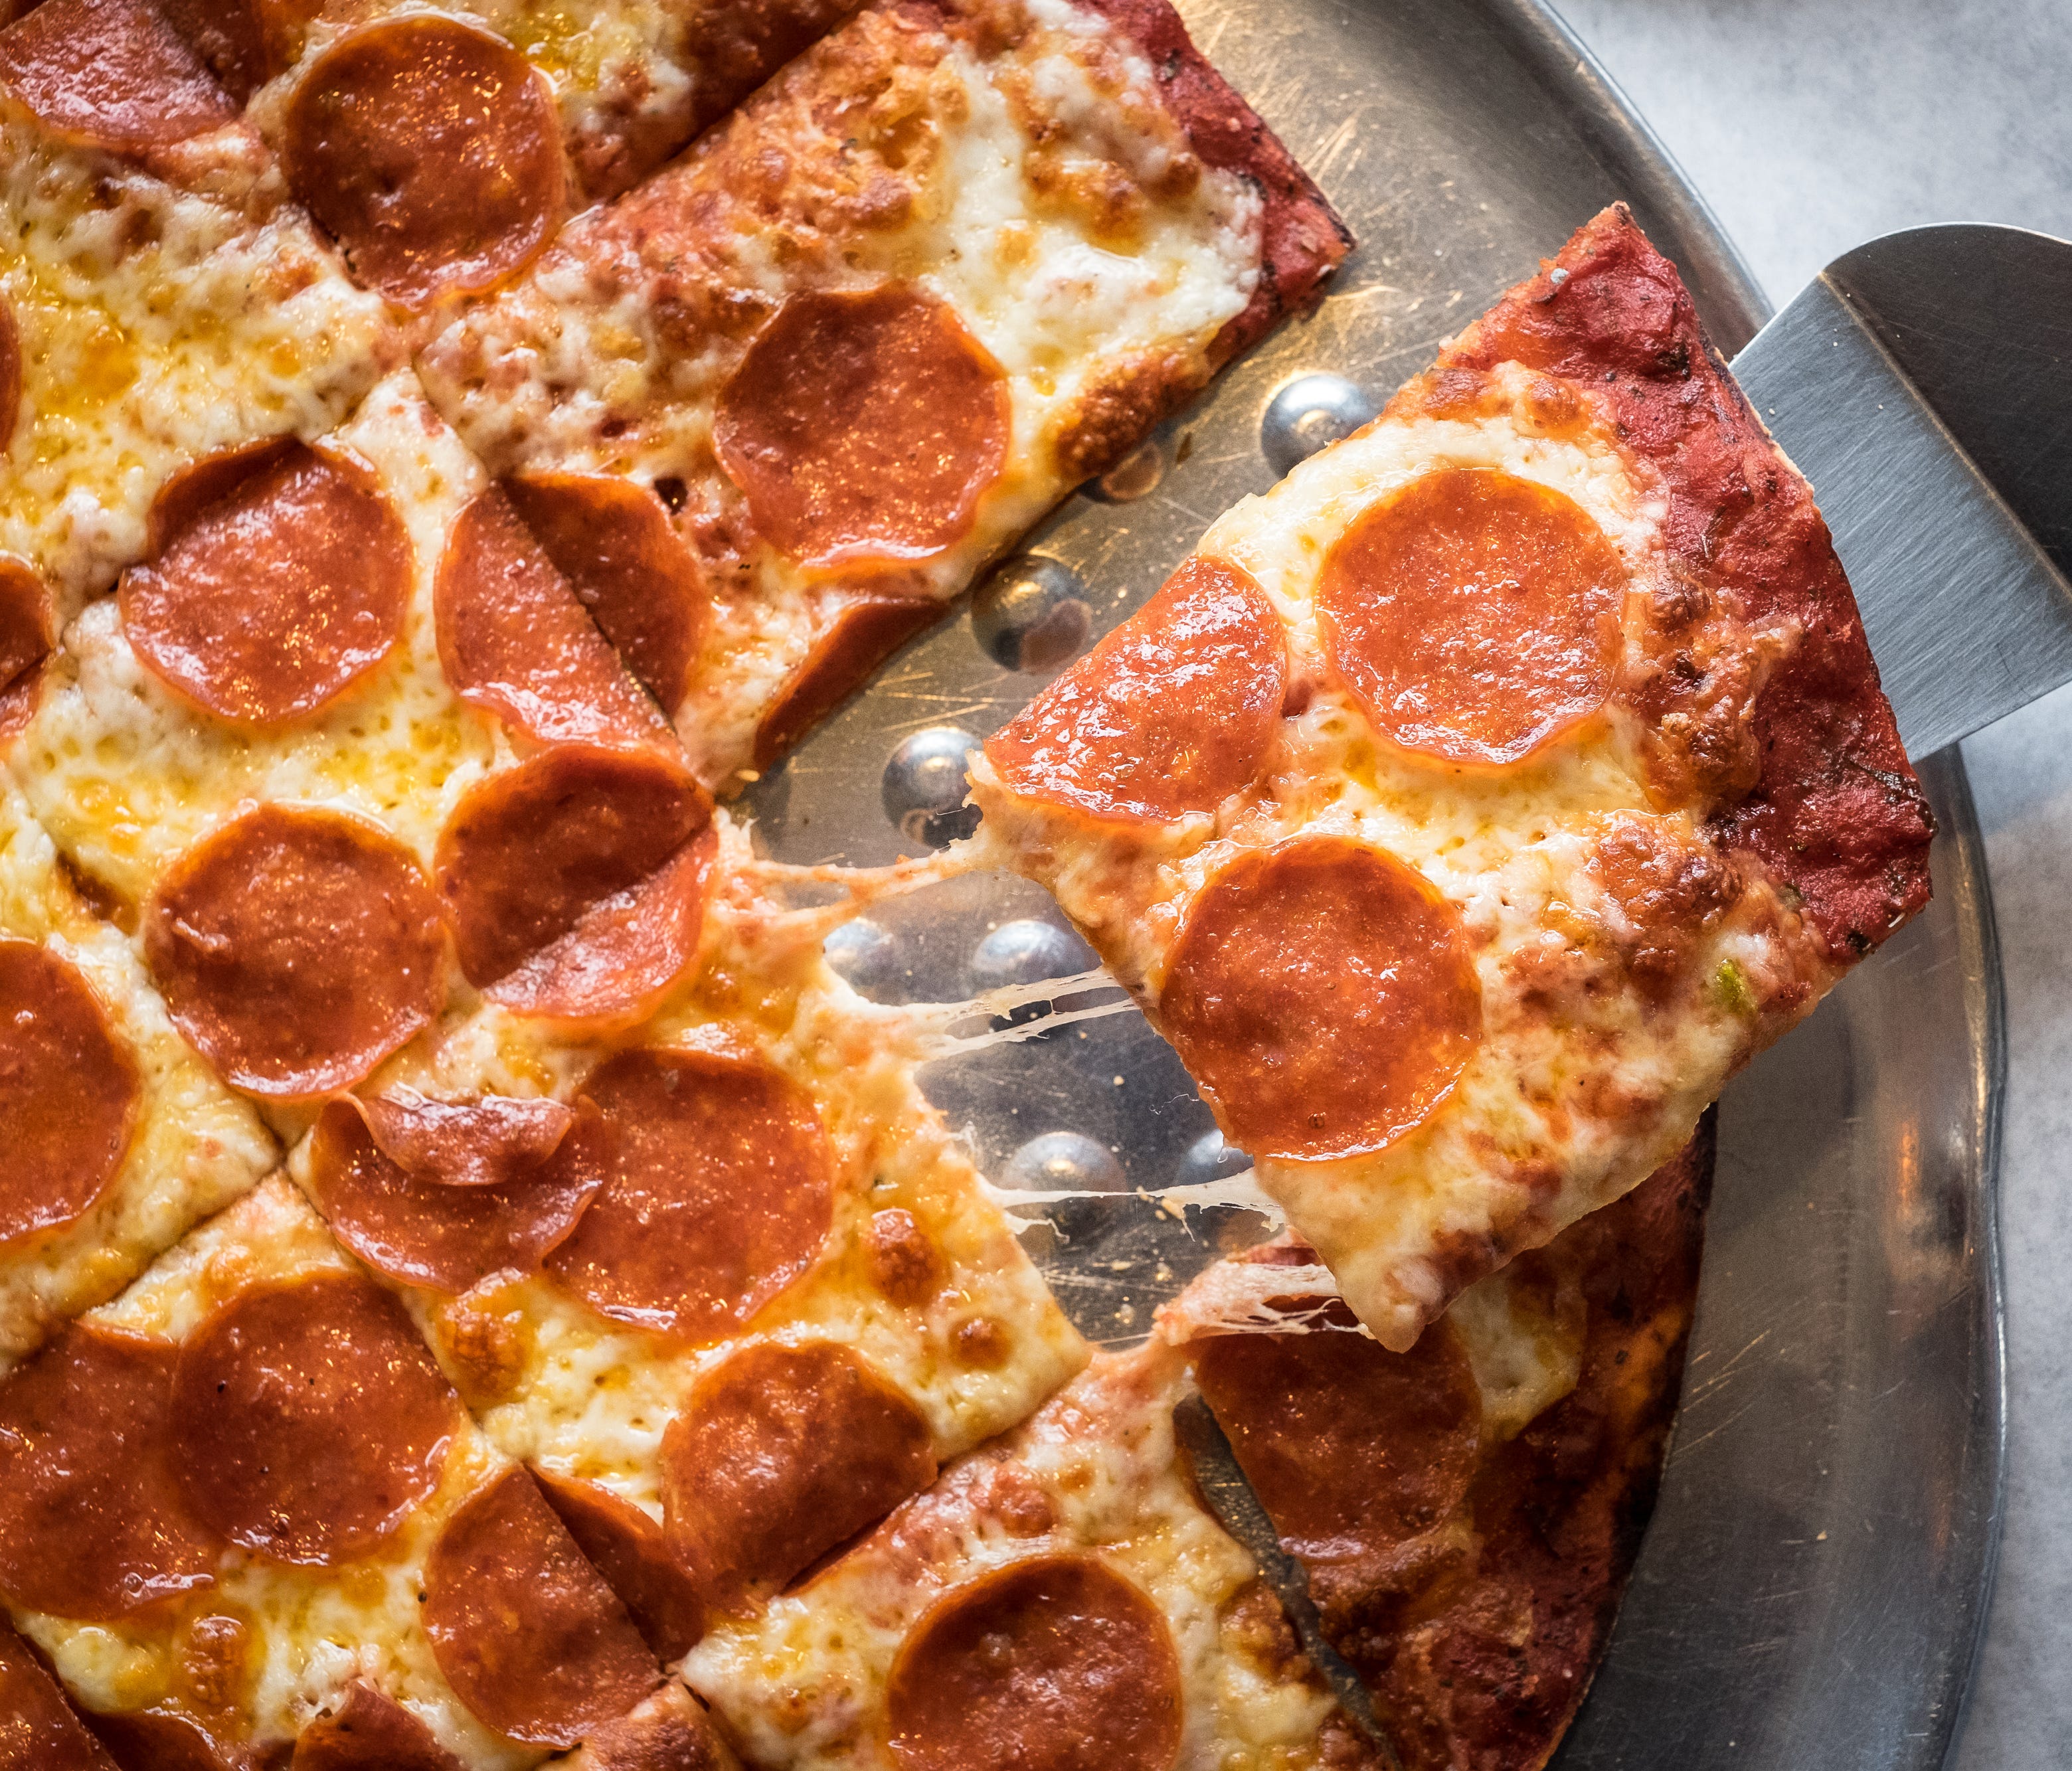 Pat's offers 11 specialty pizzas, served tavern style, and a create your own option.